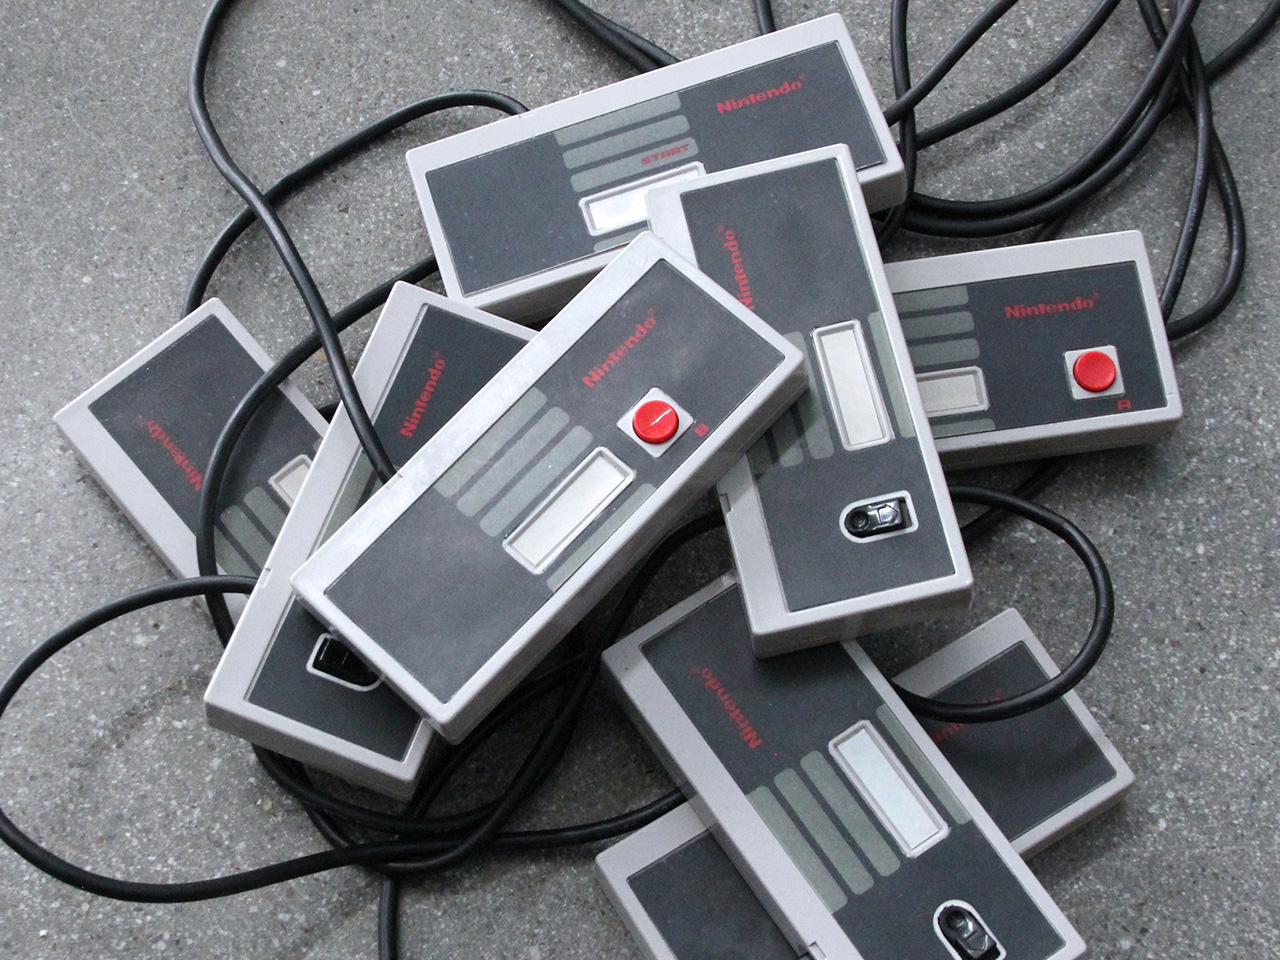 A close-up photograph of the Octopad's eight one-switch controllers in a pile on the ground.